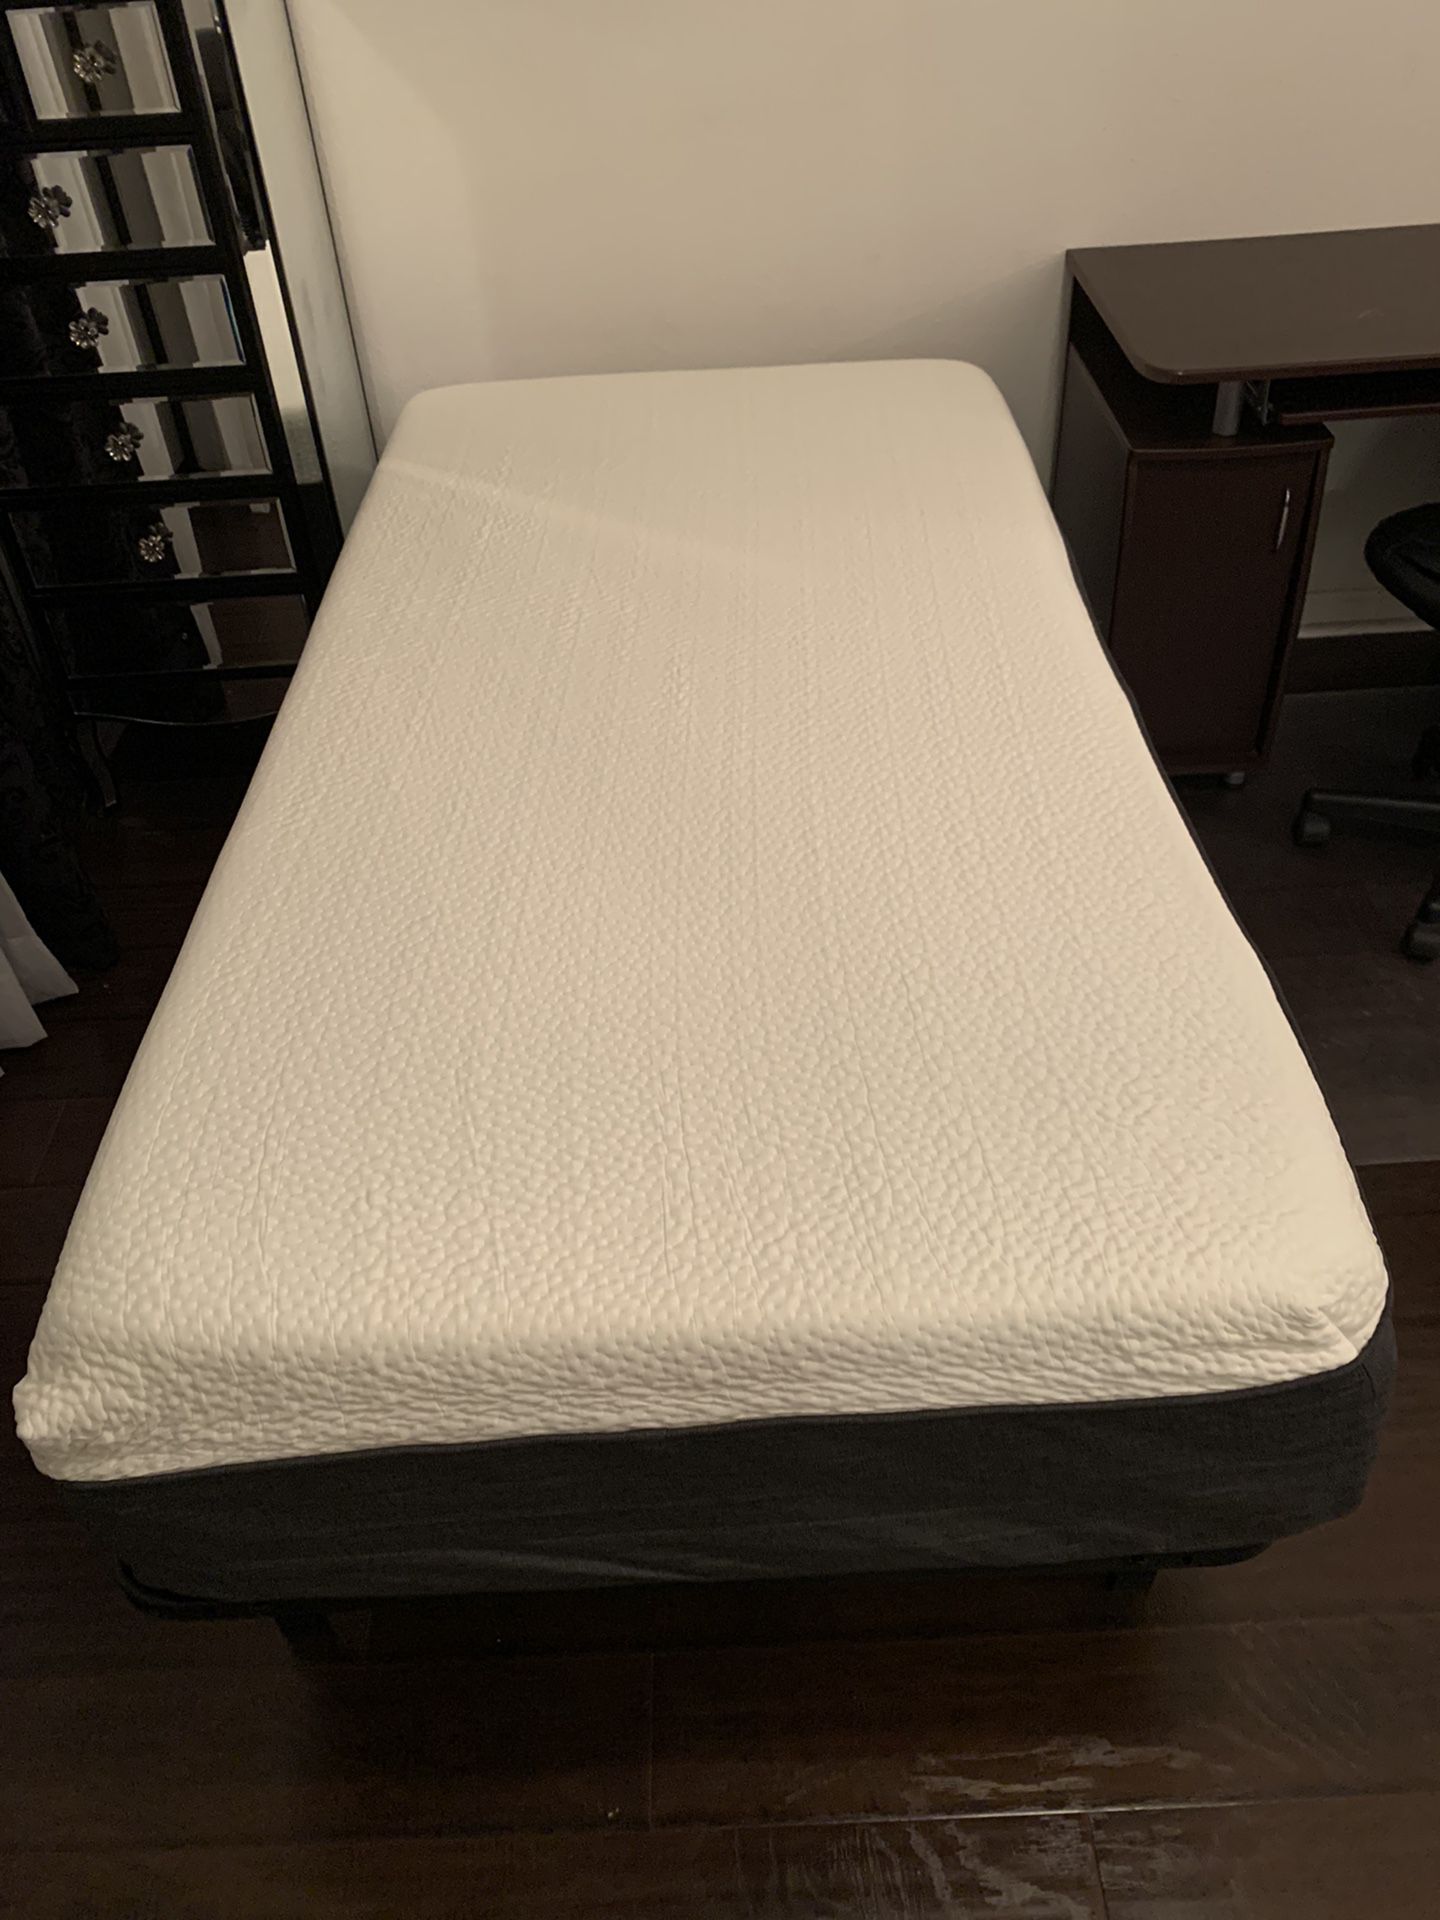 3 Months New! Memory Foam Top Quality 